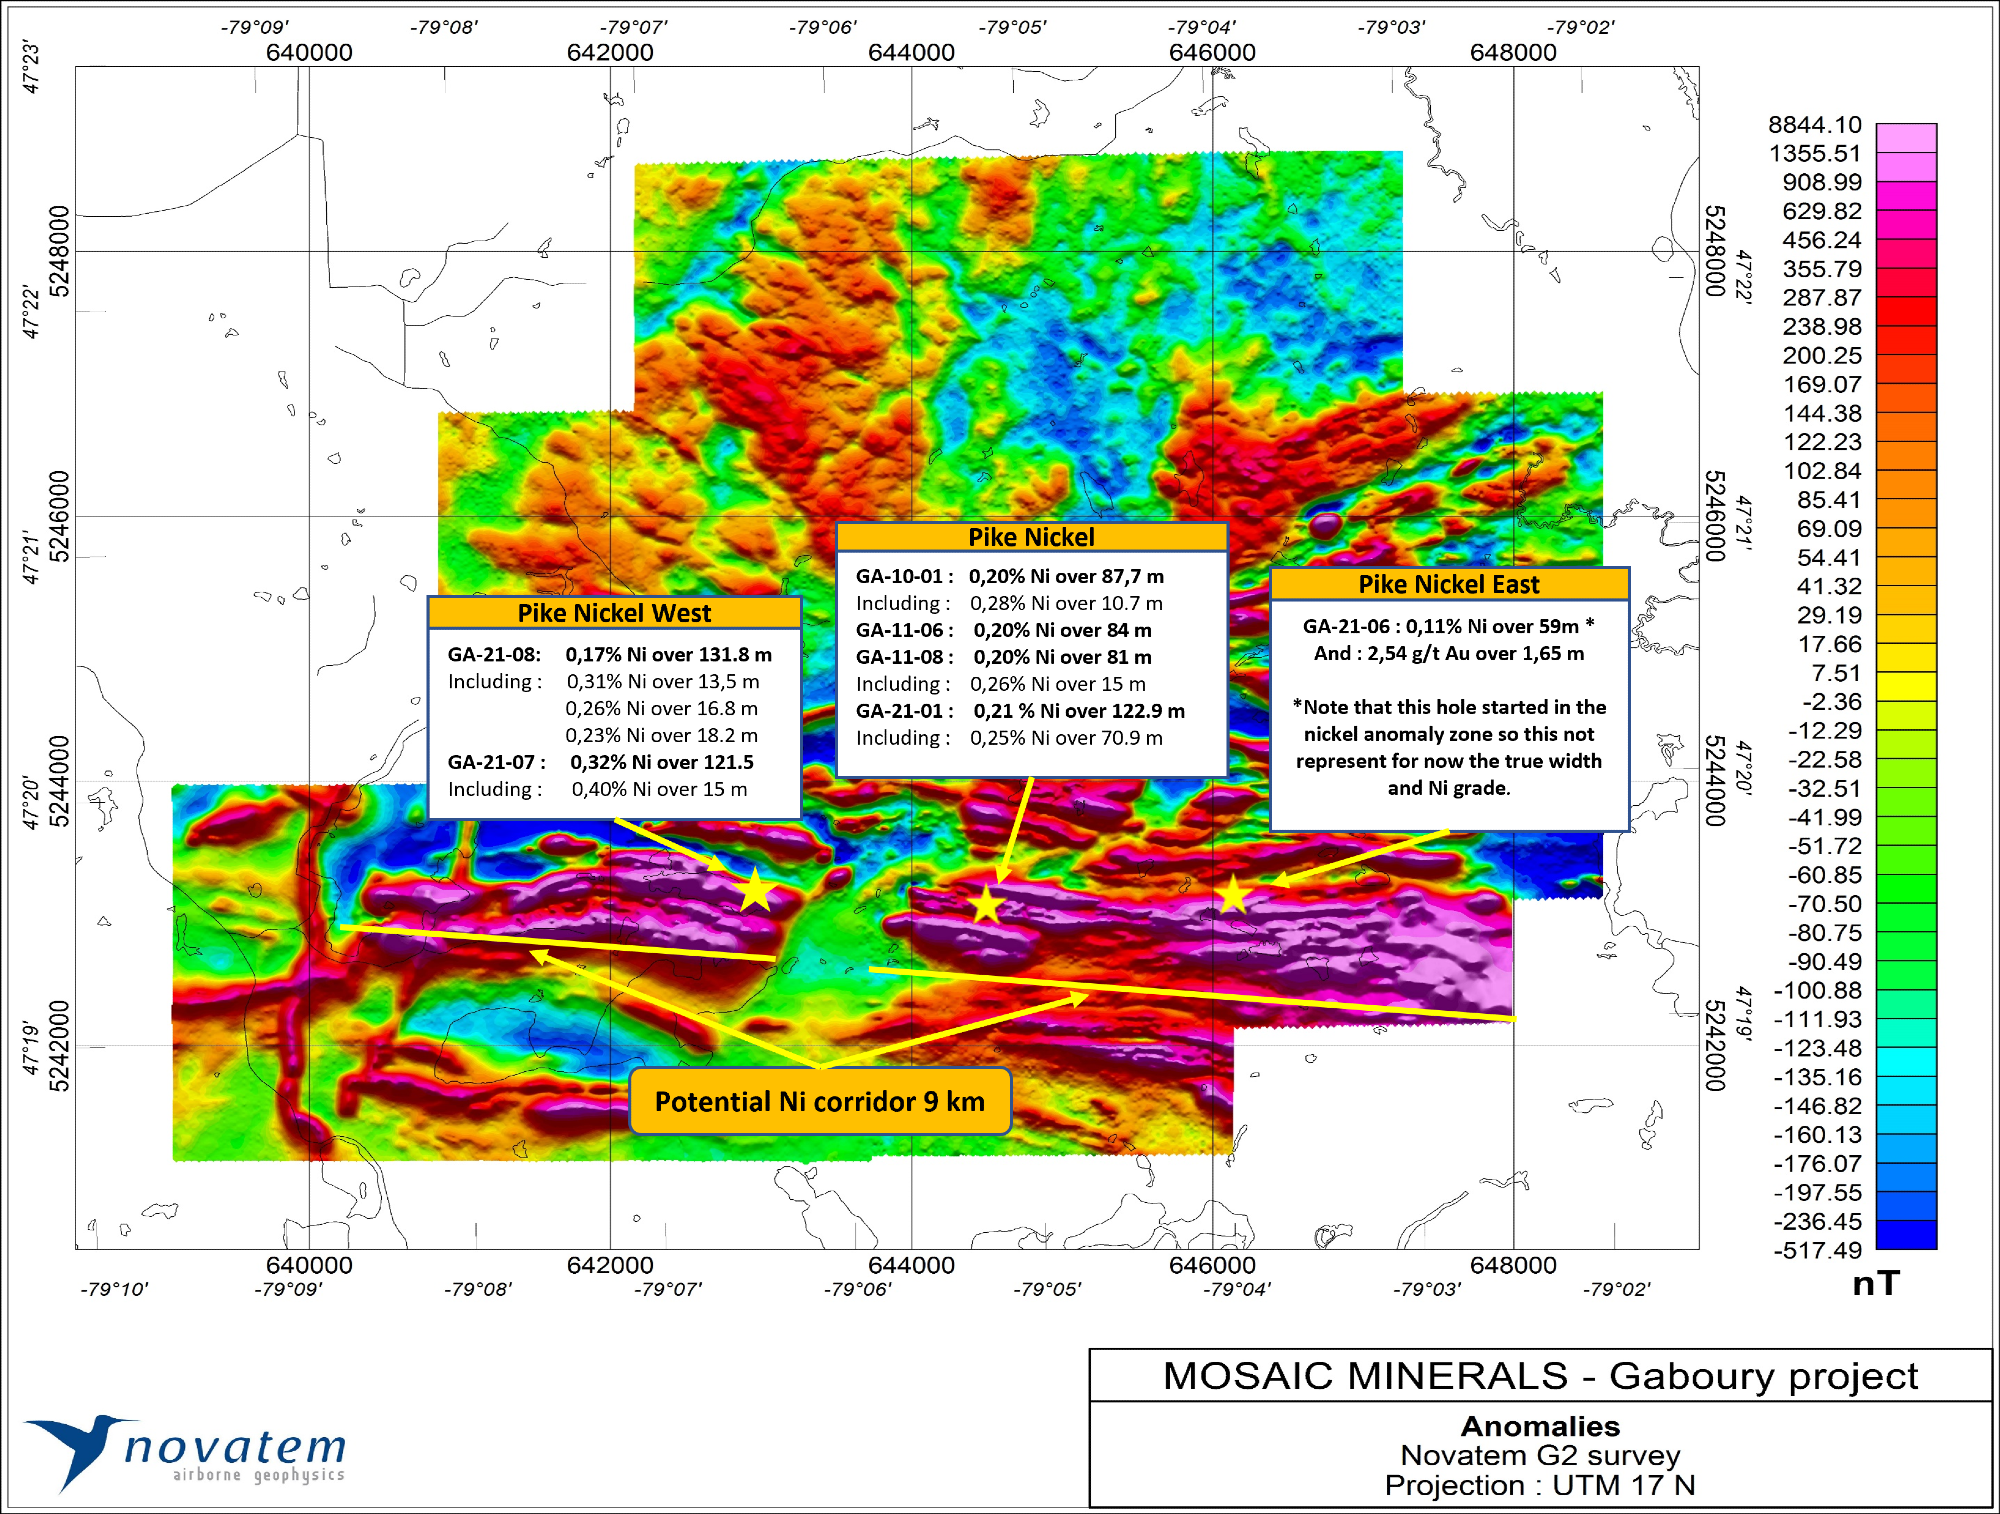 Mosaic Announces Drilling on The Gaboury Project.